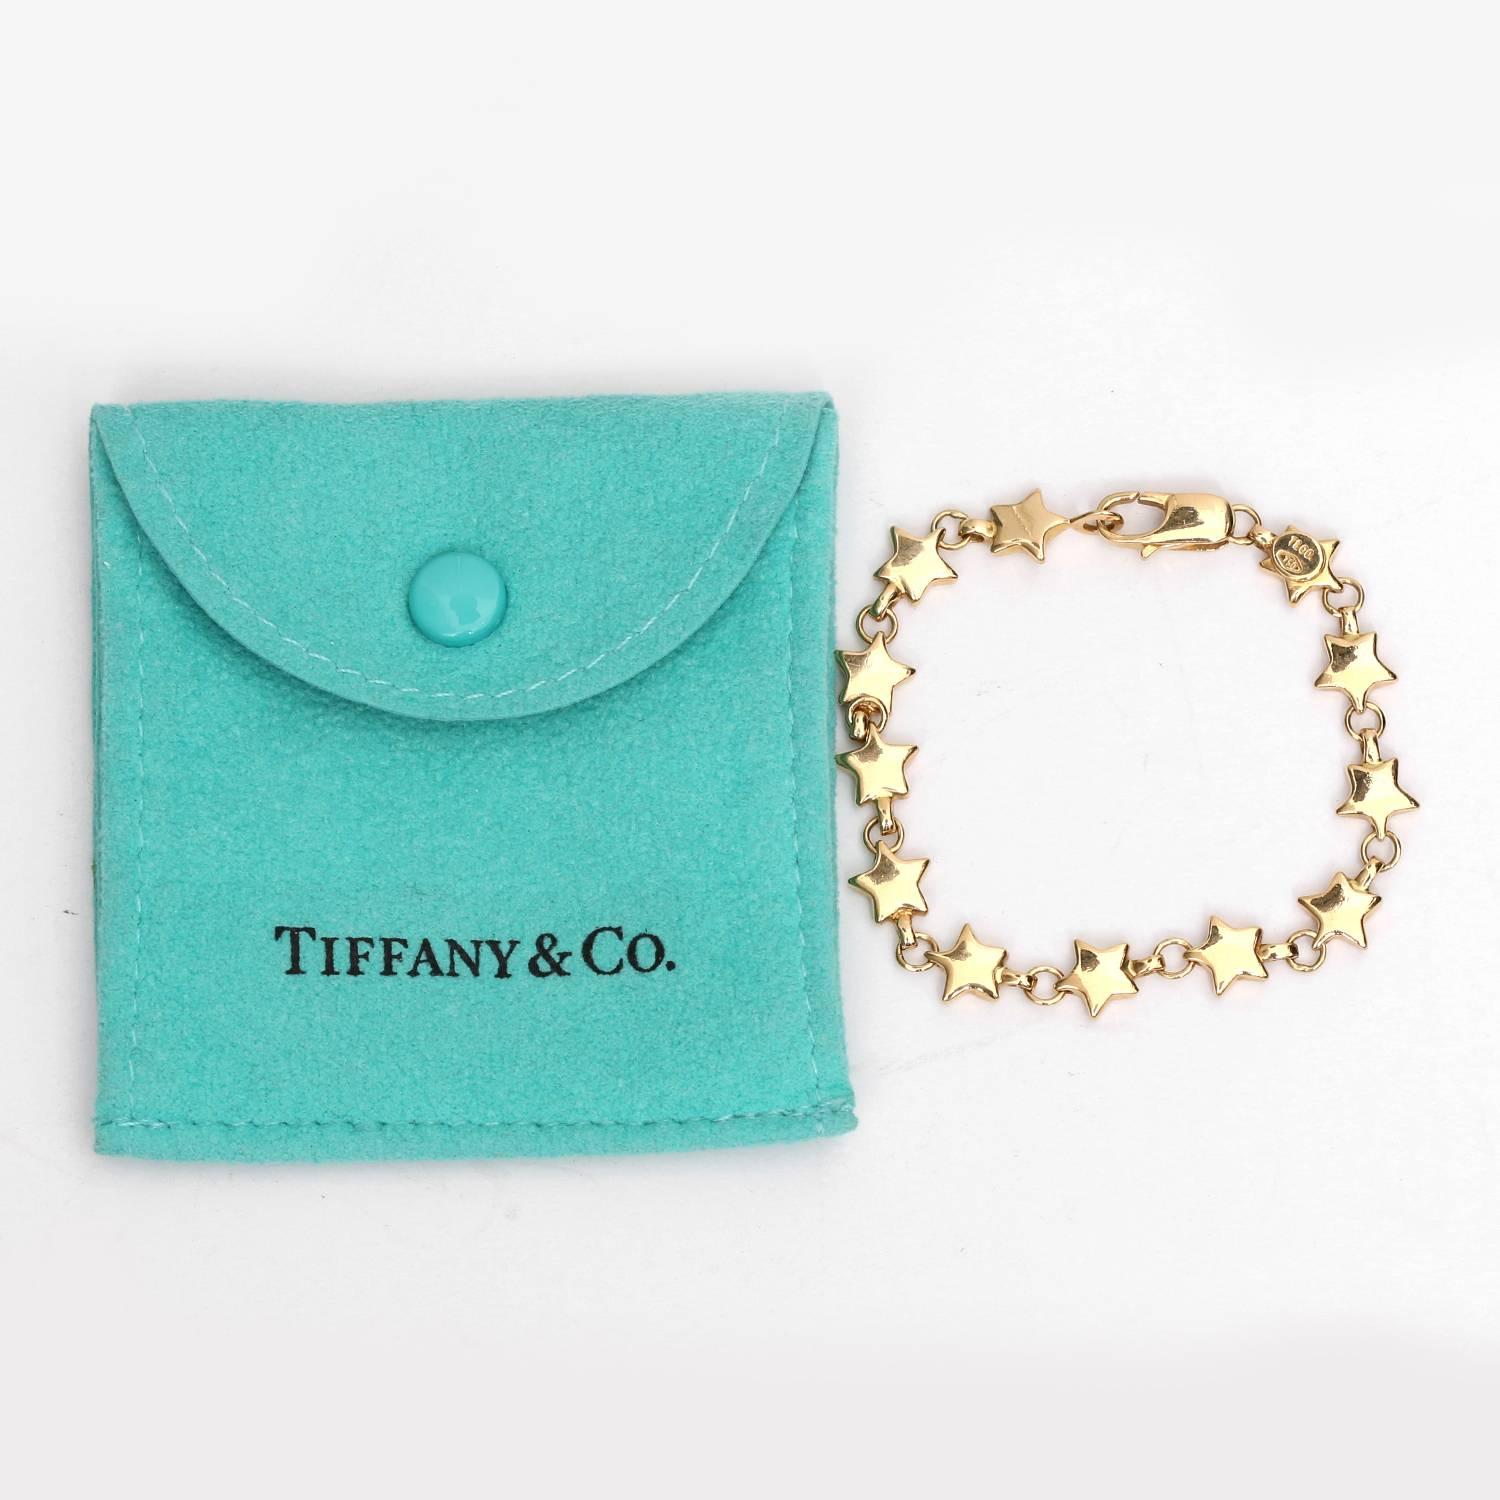 Tiffany & co. 18K Yellow Gold Star Link Bracelet  - 18K Yellow gold link bracelet. Hallmark, 750 & T&CO. Lobster clasp closure. Approximately 6 inches long. Total weight 13.8 grams. Pre-owned with Tiffany & Co. pouch.